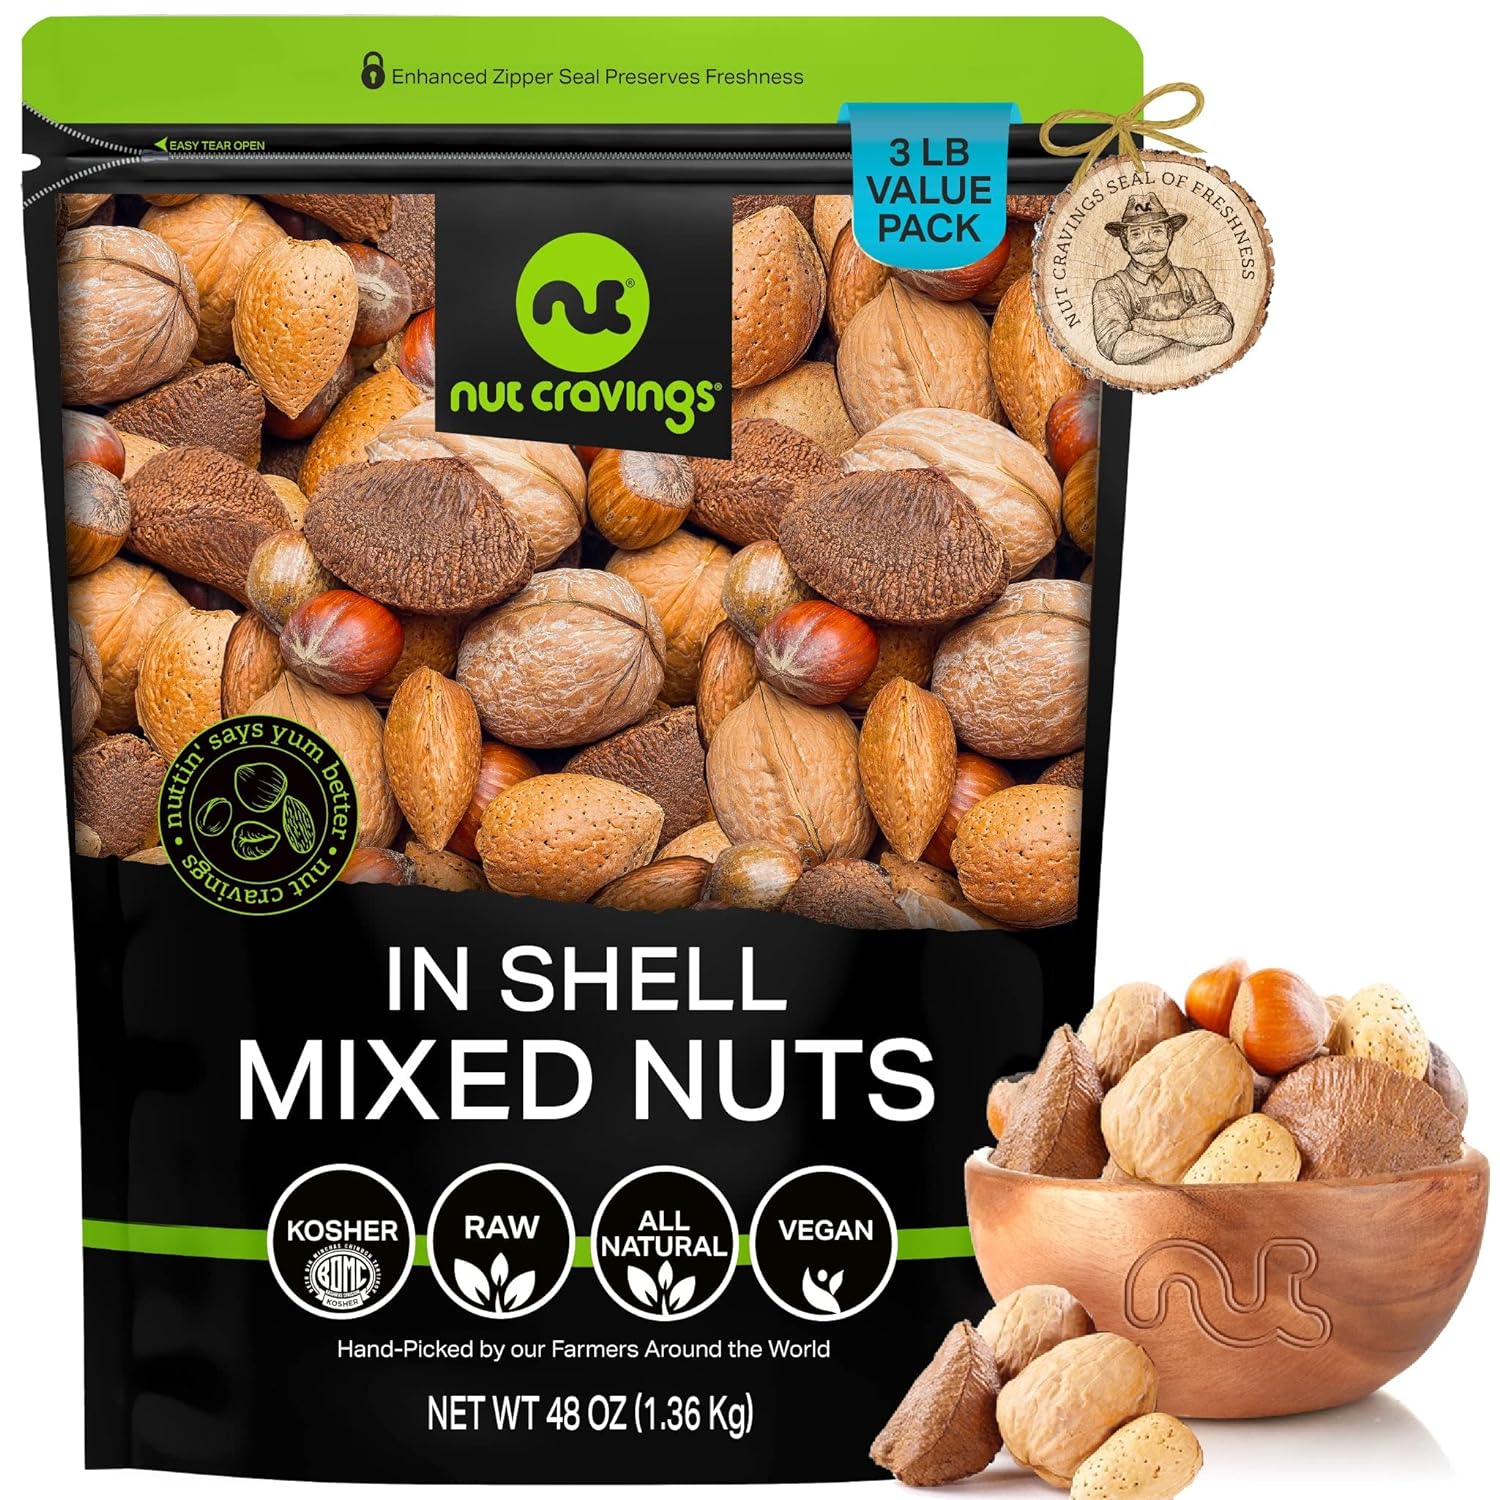 Nut Cravings - Mixed Nuts (In Shell) Brazil, Walnuts, Filberts, Almonds, Pecans (48oz - 3 LB) Packed Fresh in Resealable Bag - Healthy Snack, Protein Food, All Natural, Keto Friendly, Vegan, Kosher